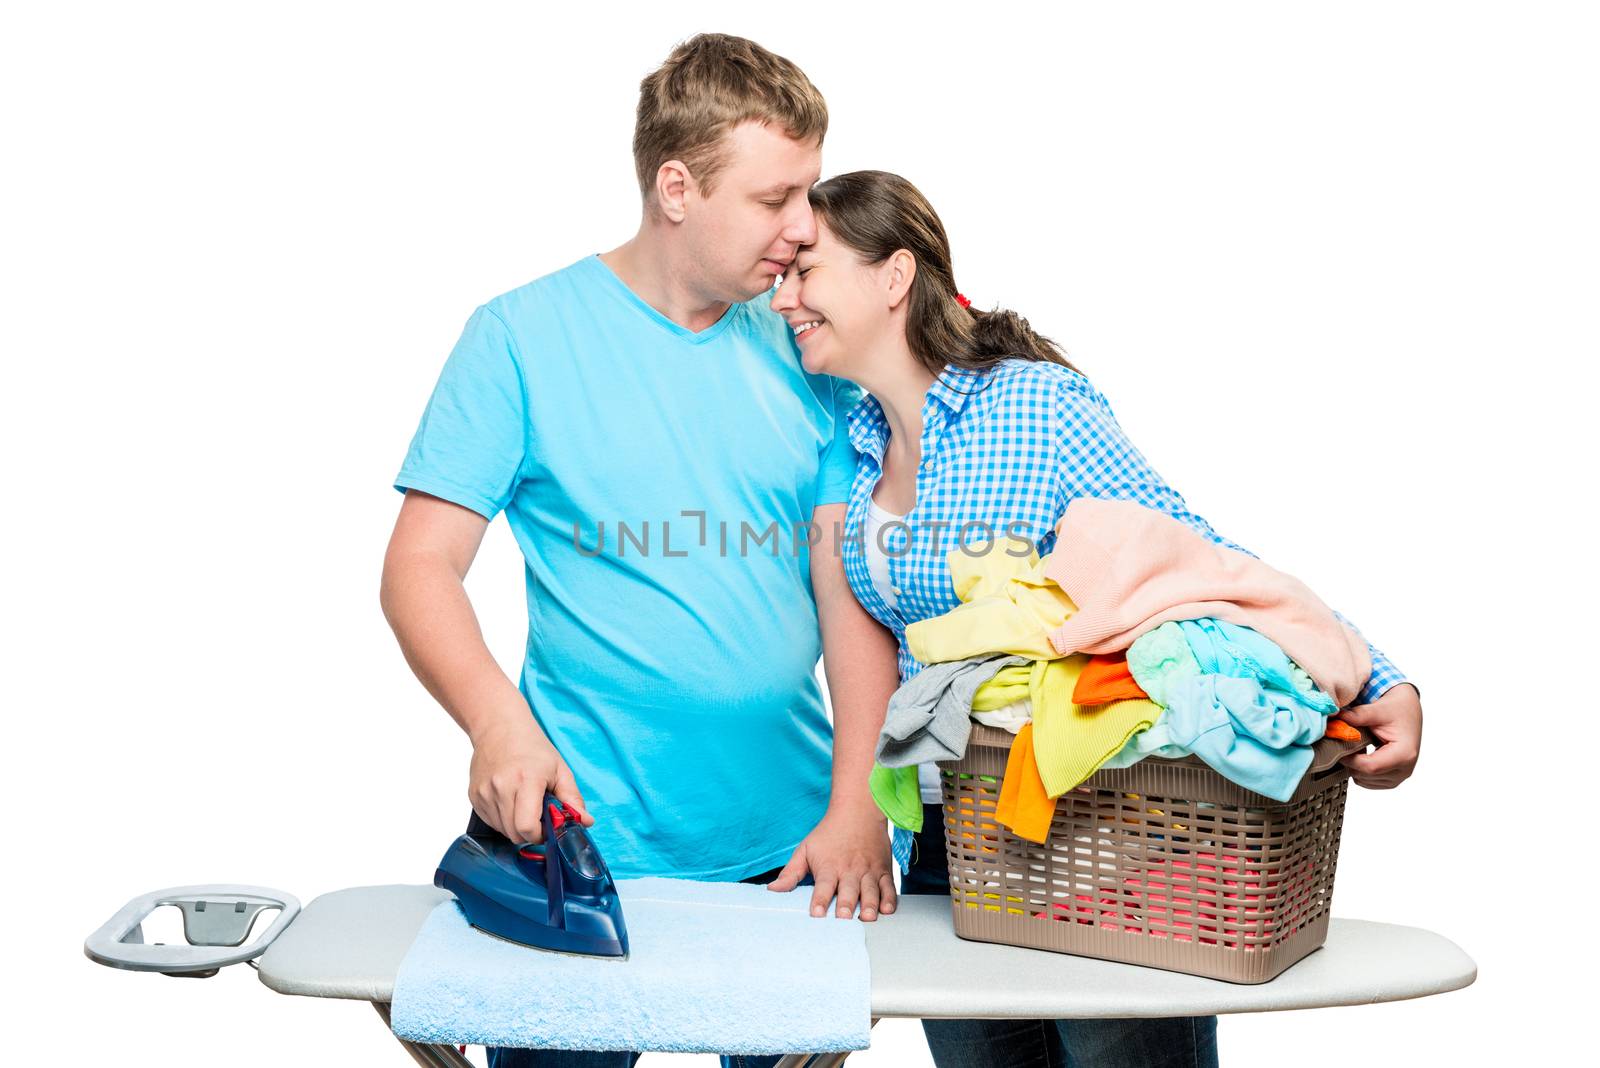 the husband helps his wife to iron clothes, help around the house, the portrait is isolated